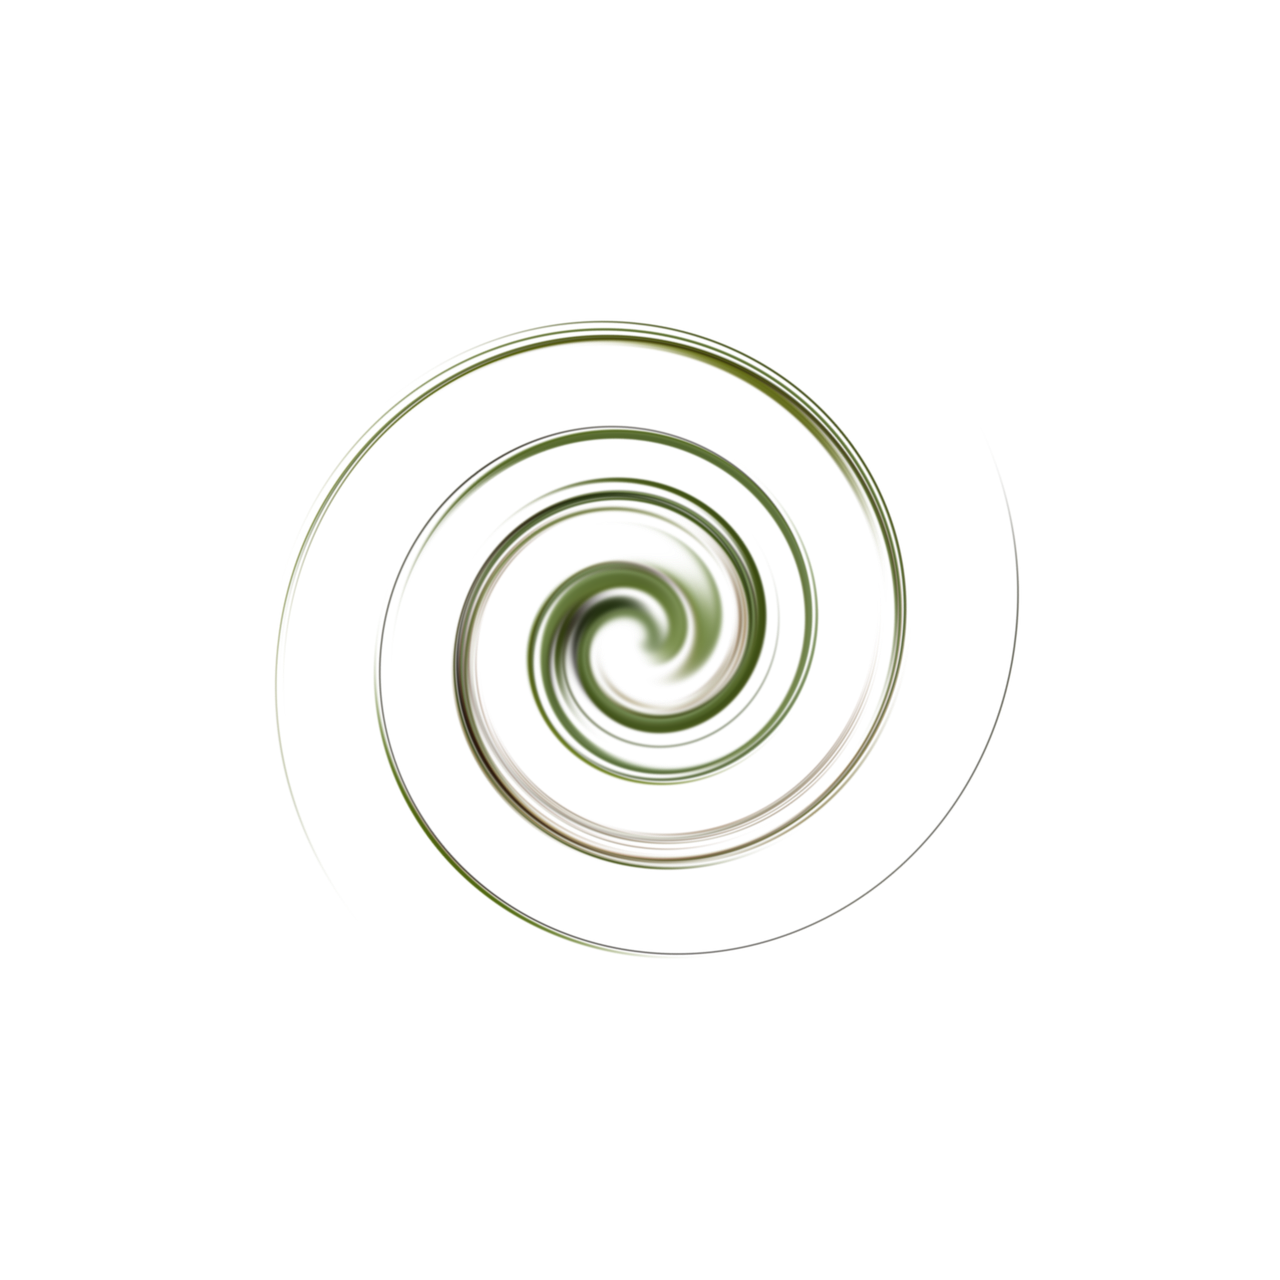 eddy spiral abstract free photo